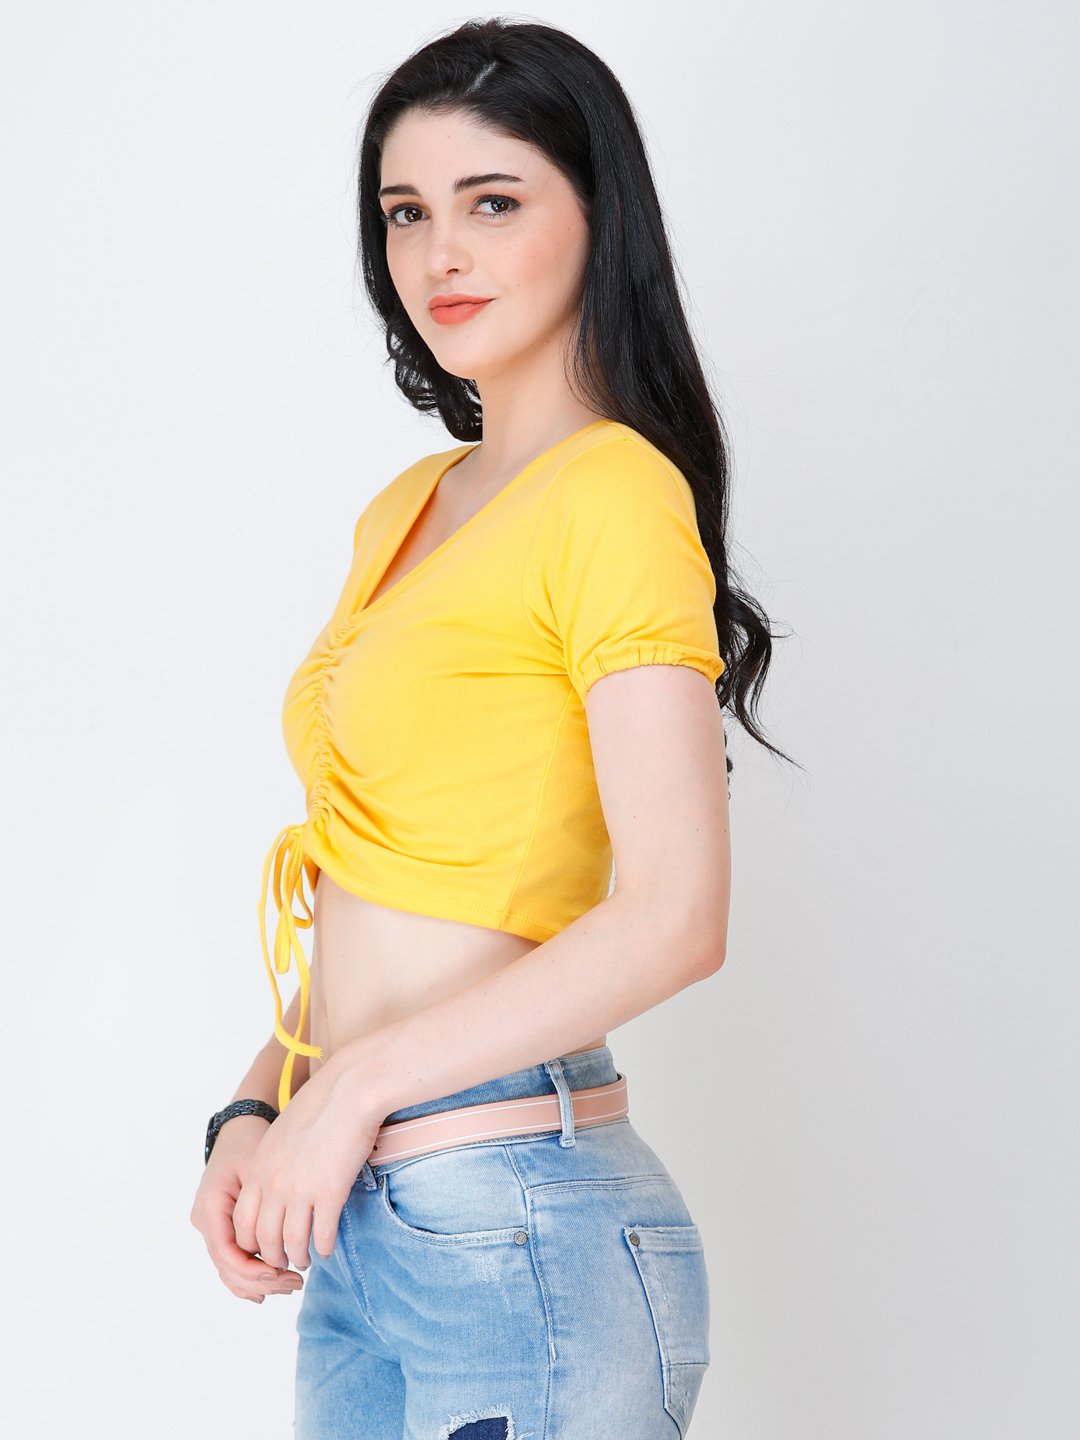 SCORPIUS yellow styled front crop top